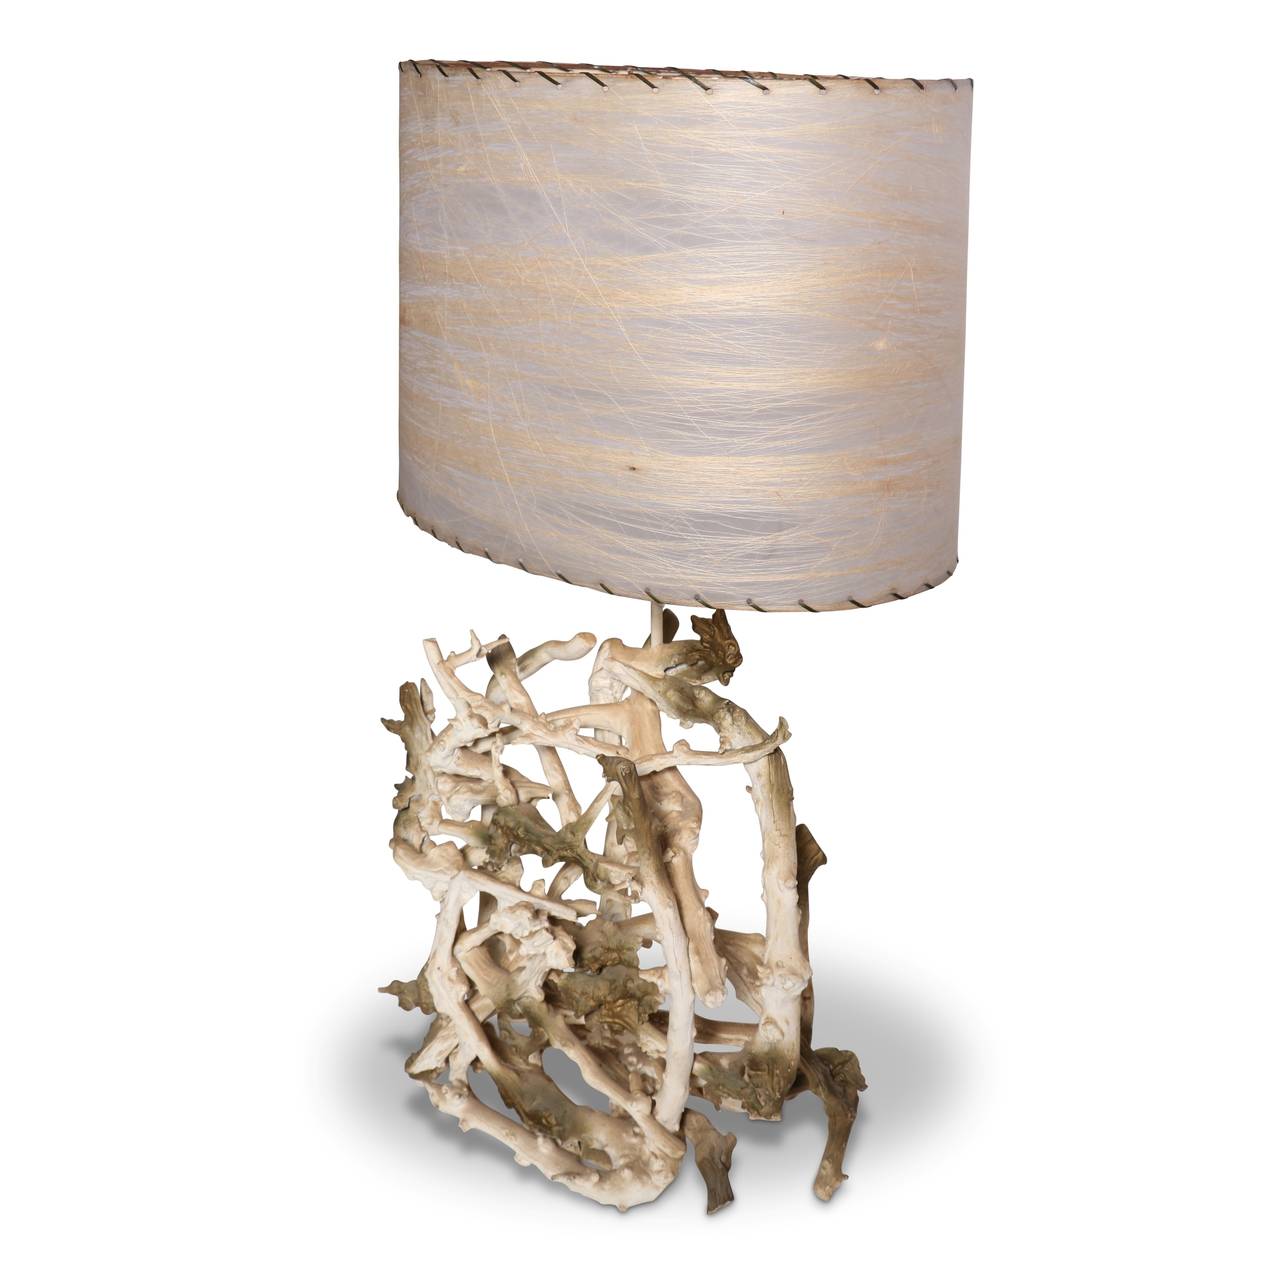 Mid-Century gesso washed driftwood table lamp with original fiber infused vellum shade and whip stitching. Original wiring.